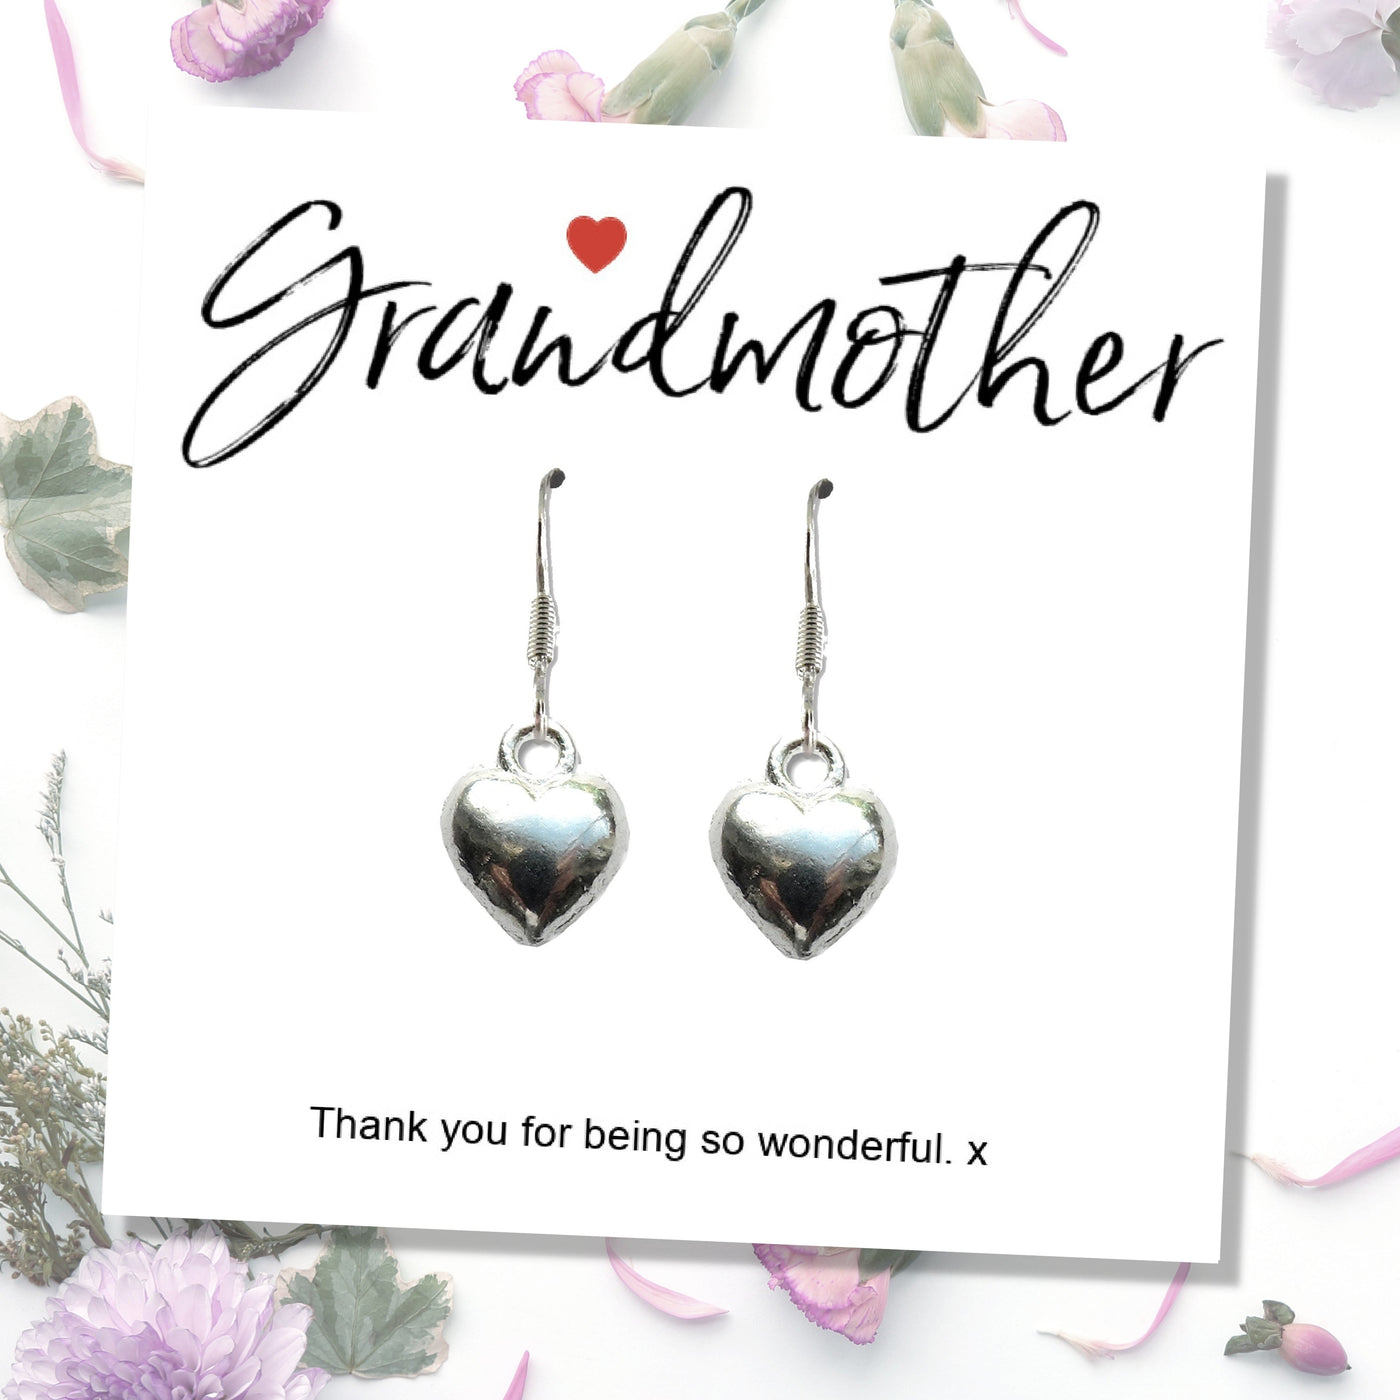 Grandmother Message Card with Heart Earrings